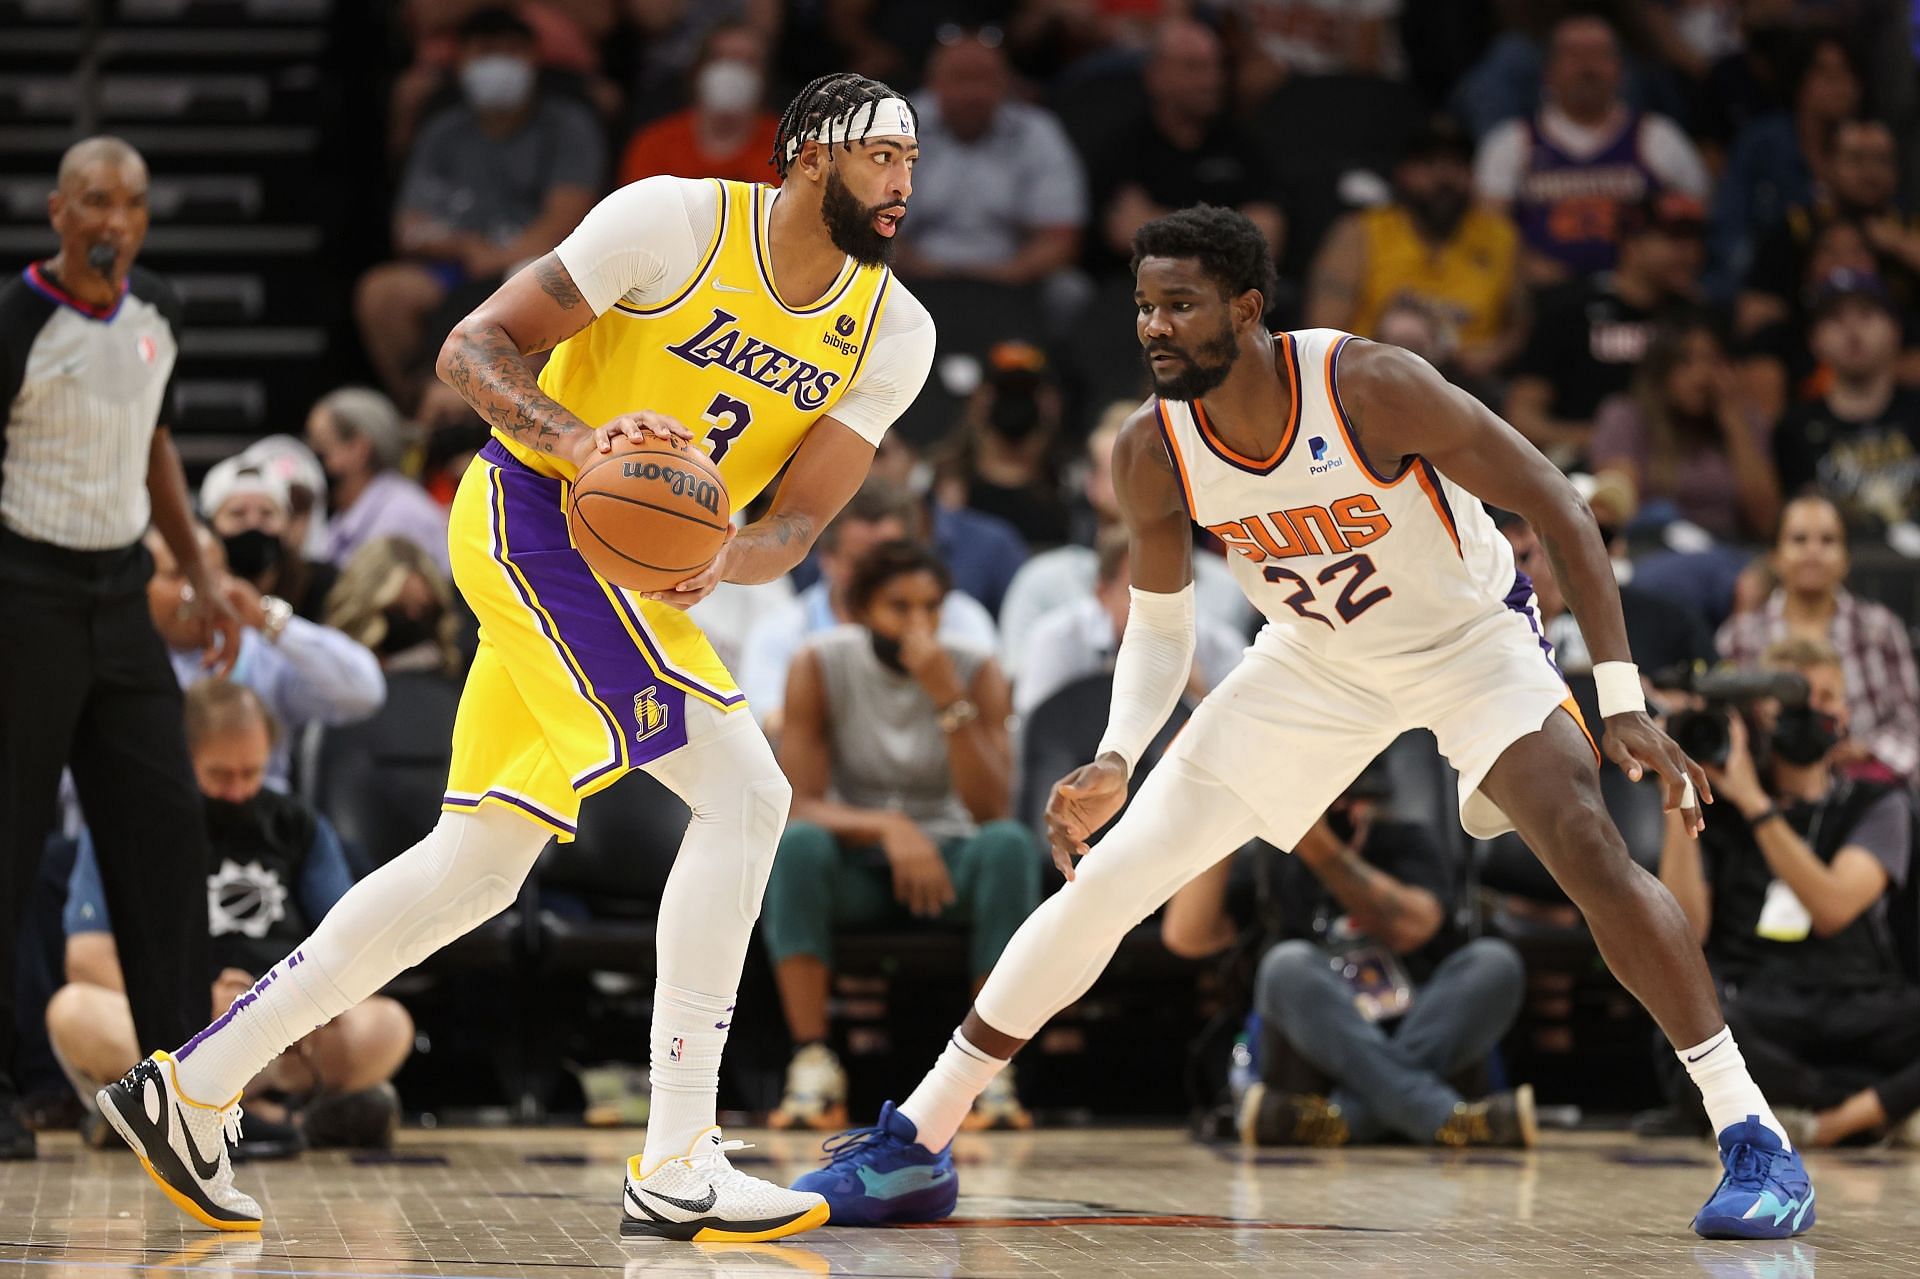 Anthony Davis #3 of the Los Angeles Lakers looks to pass around Deandre Ayton #22 of the Phoenix Suns during the NBA preseason game at Footprint Center on October 06, 2021 in Phoenix, Arizona.